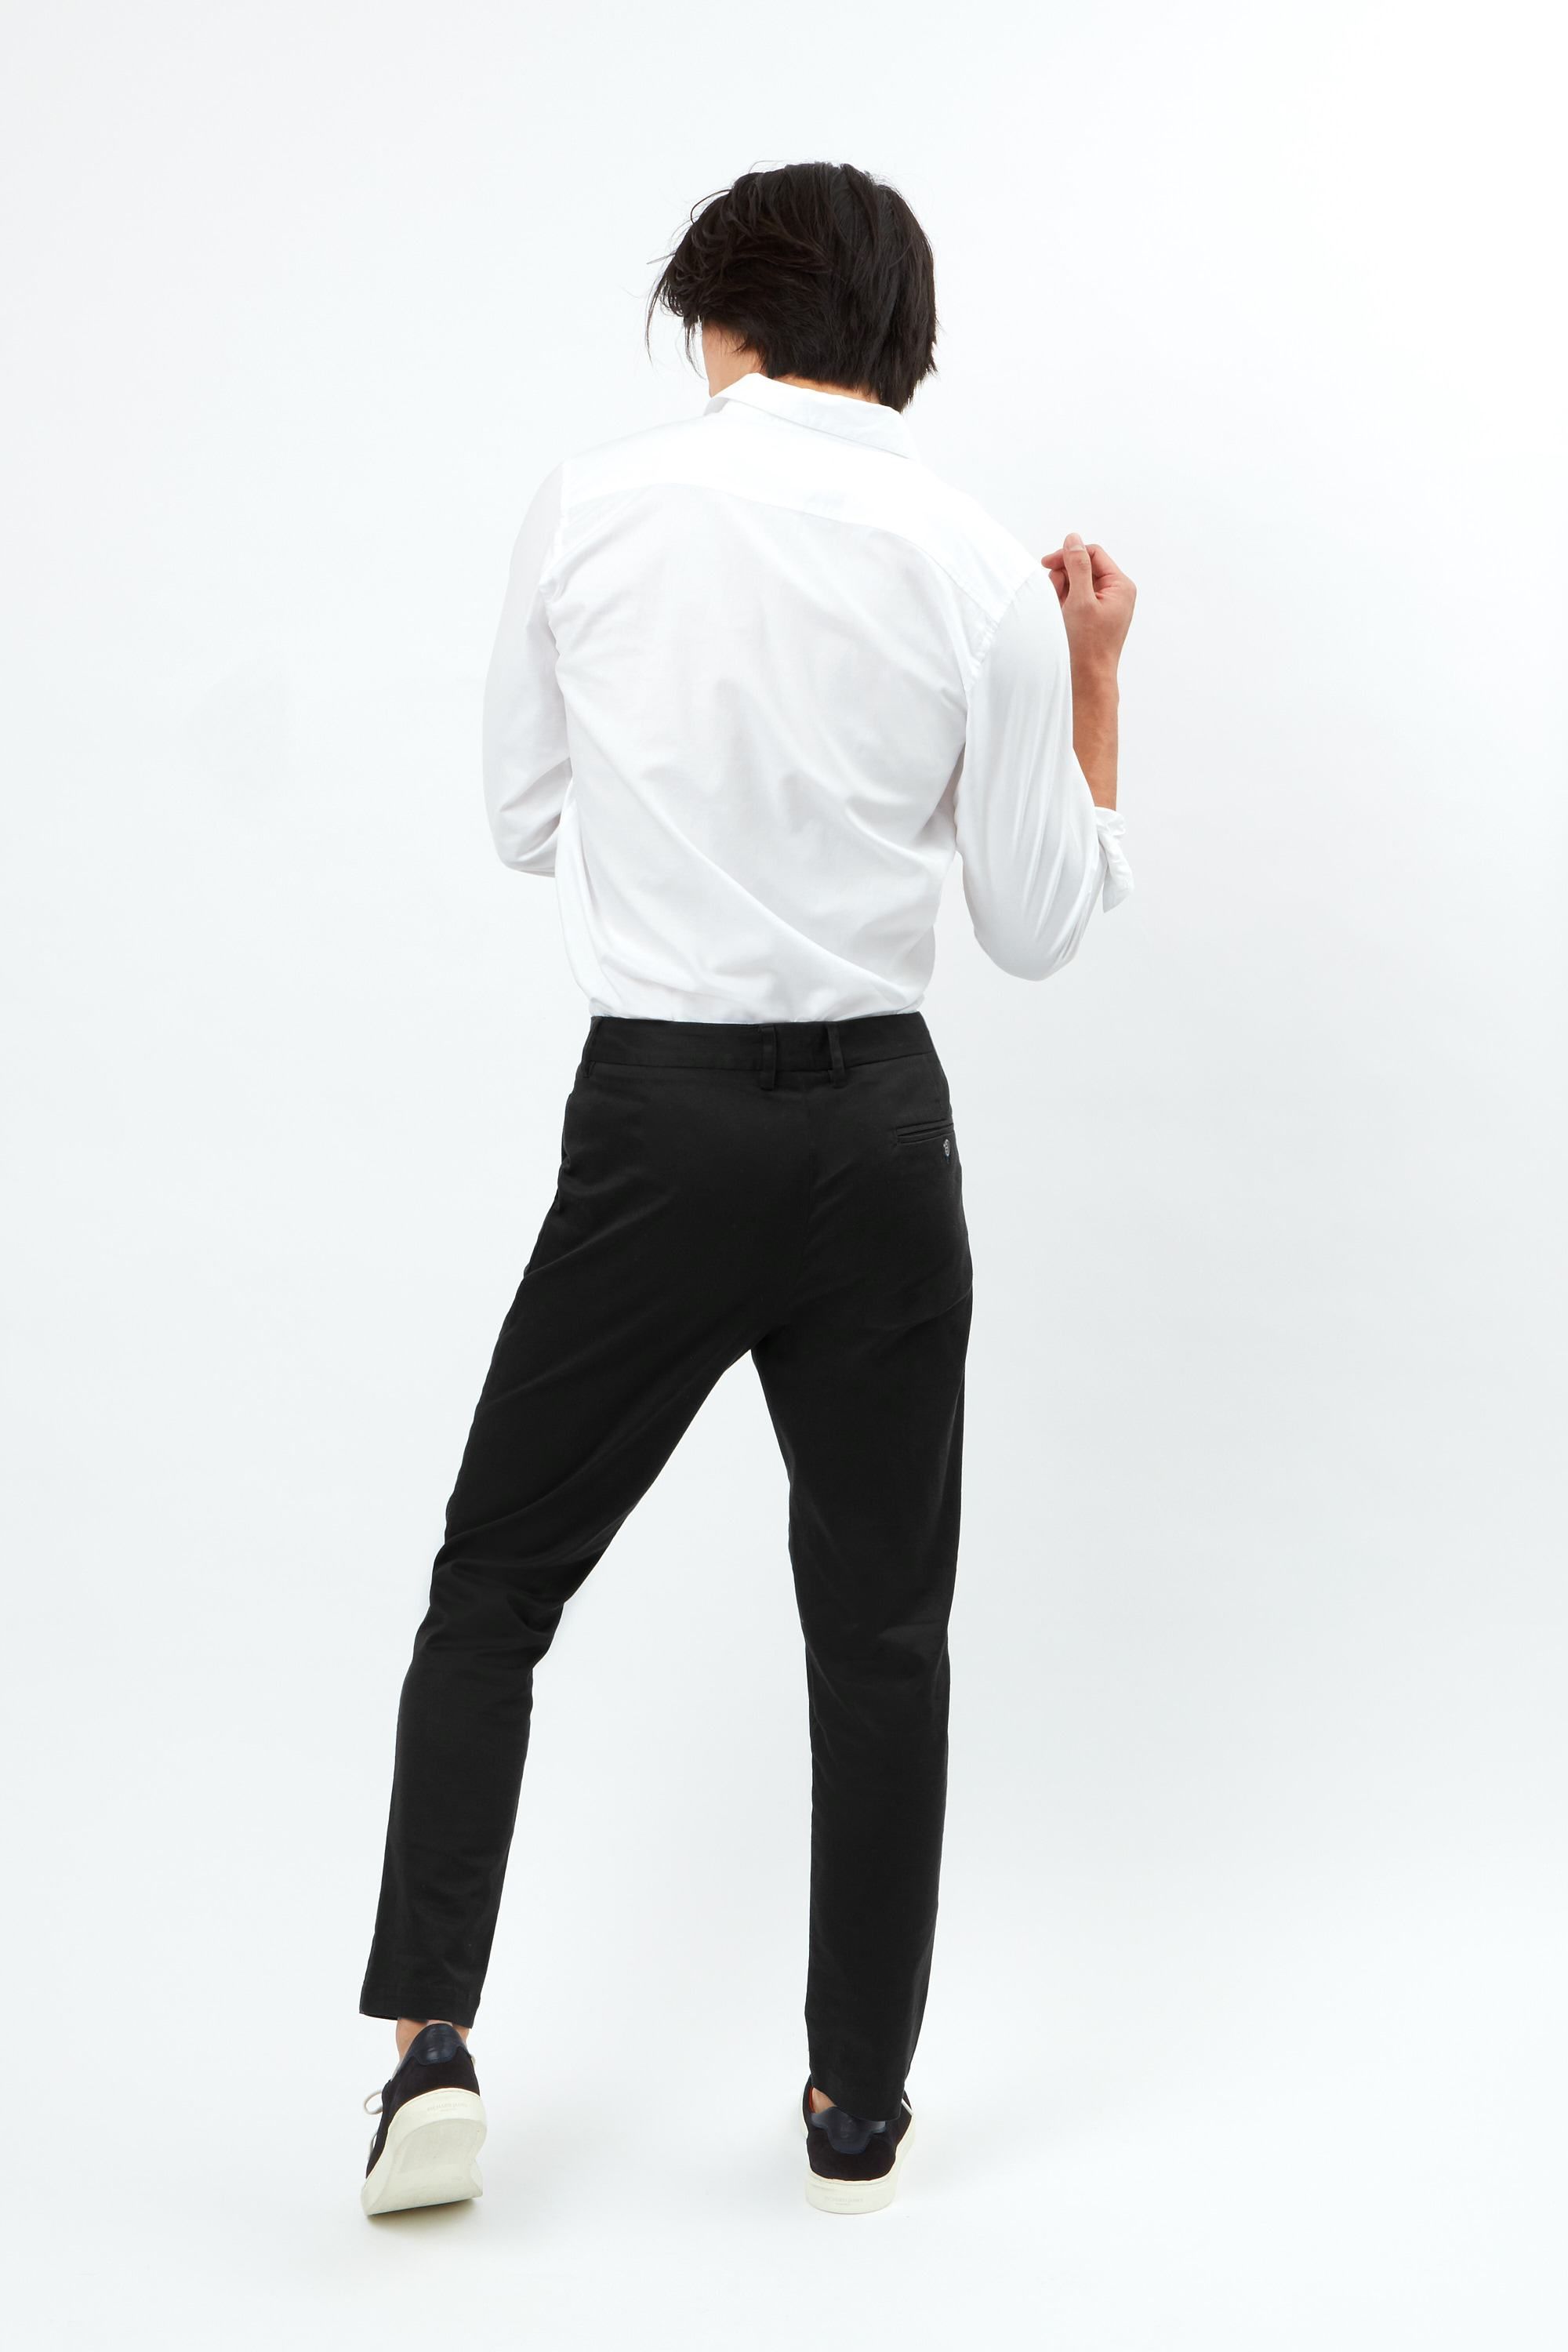 Cotton Stretch Chino
RJL0009
Medium fit chinos in stretch Bodyfit cotton and Spandex twill. 
KEY: Durable, Stretch, Utility.
DETAIL: Flat front, zip fly, button fastening, belt loops, two front pockets, ticket pocket, one button back pocket, locker loop. 
FABRICATION: 97% cotton 3% Spandex Bodyfit twill 
 